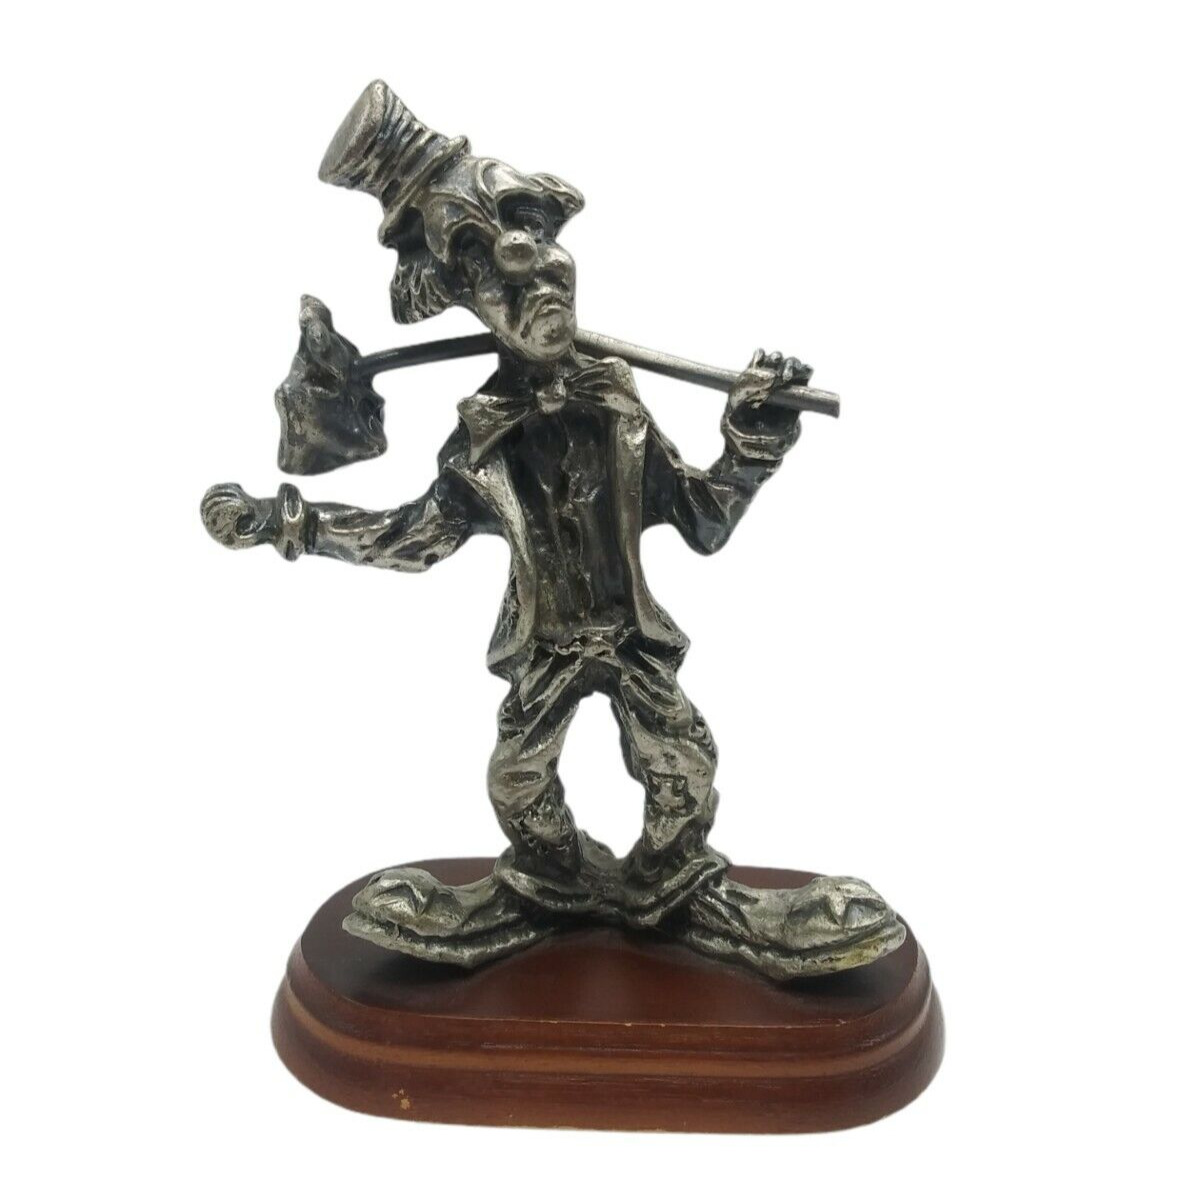 Pewter Hobo Clown Figurine Sculpture Wood Mounted Hitchhiker